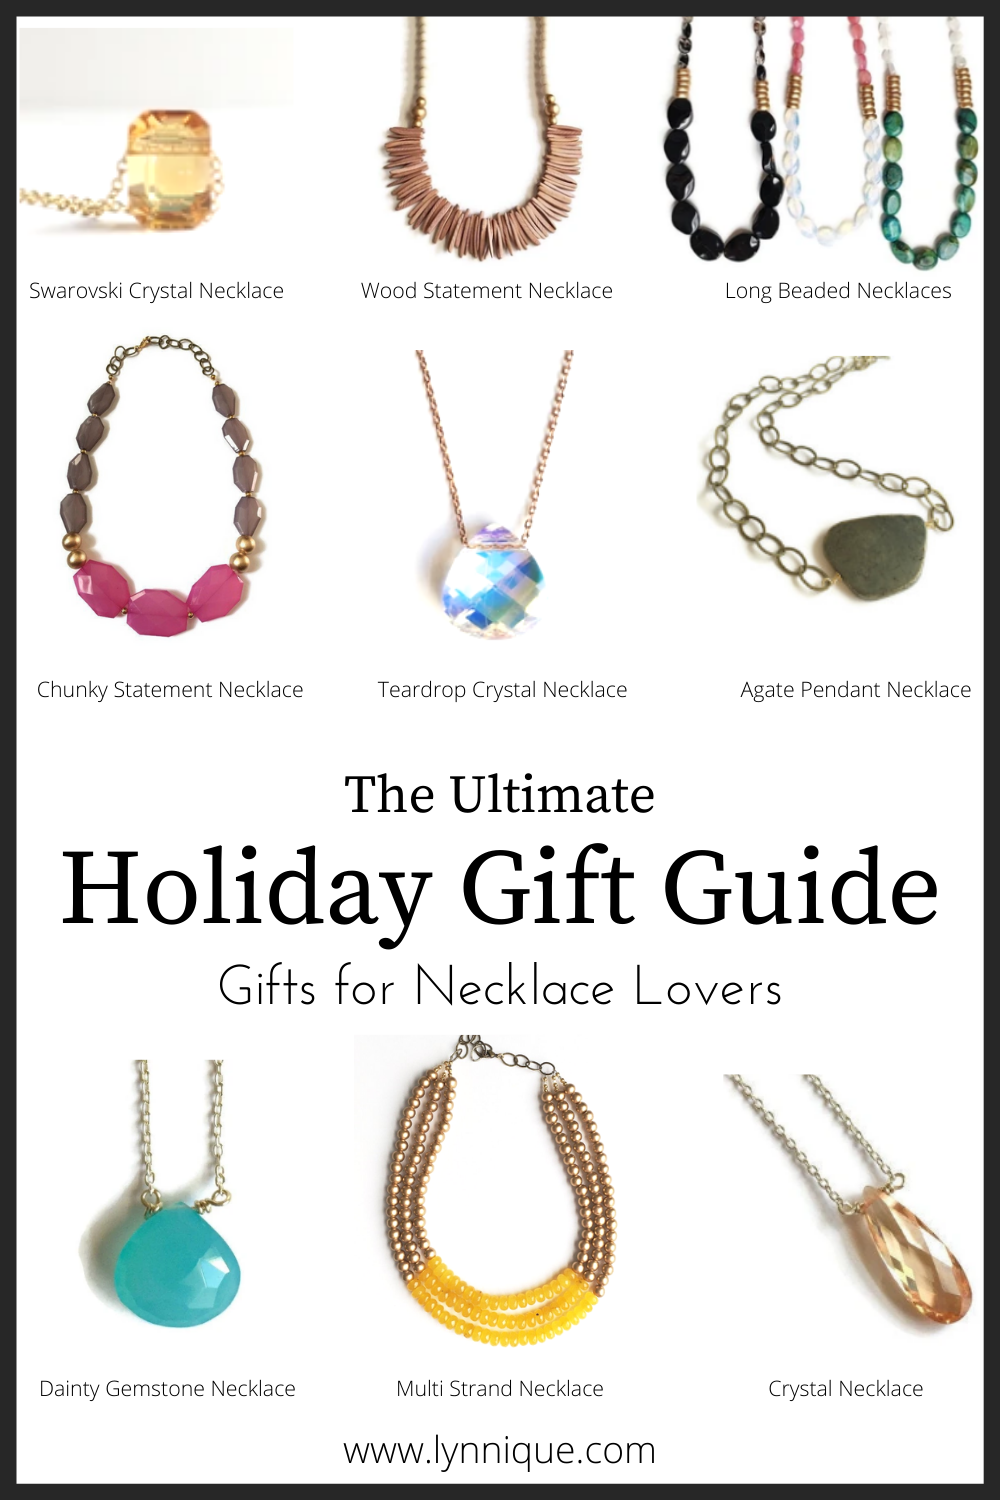 The Ultimate Holiday Gift Guide - Gifts for Necklace Lovers